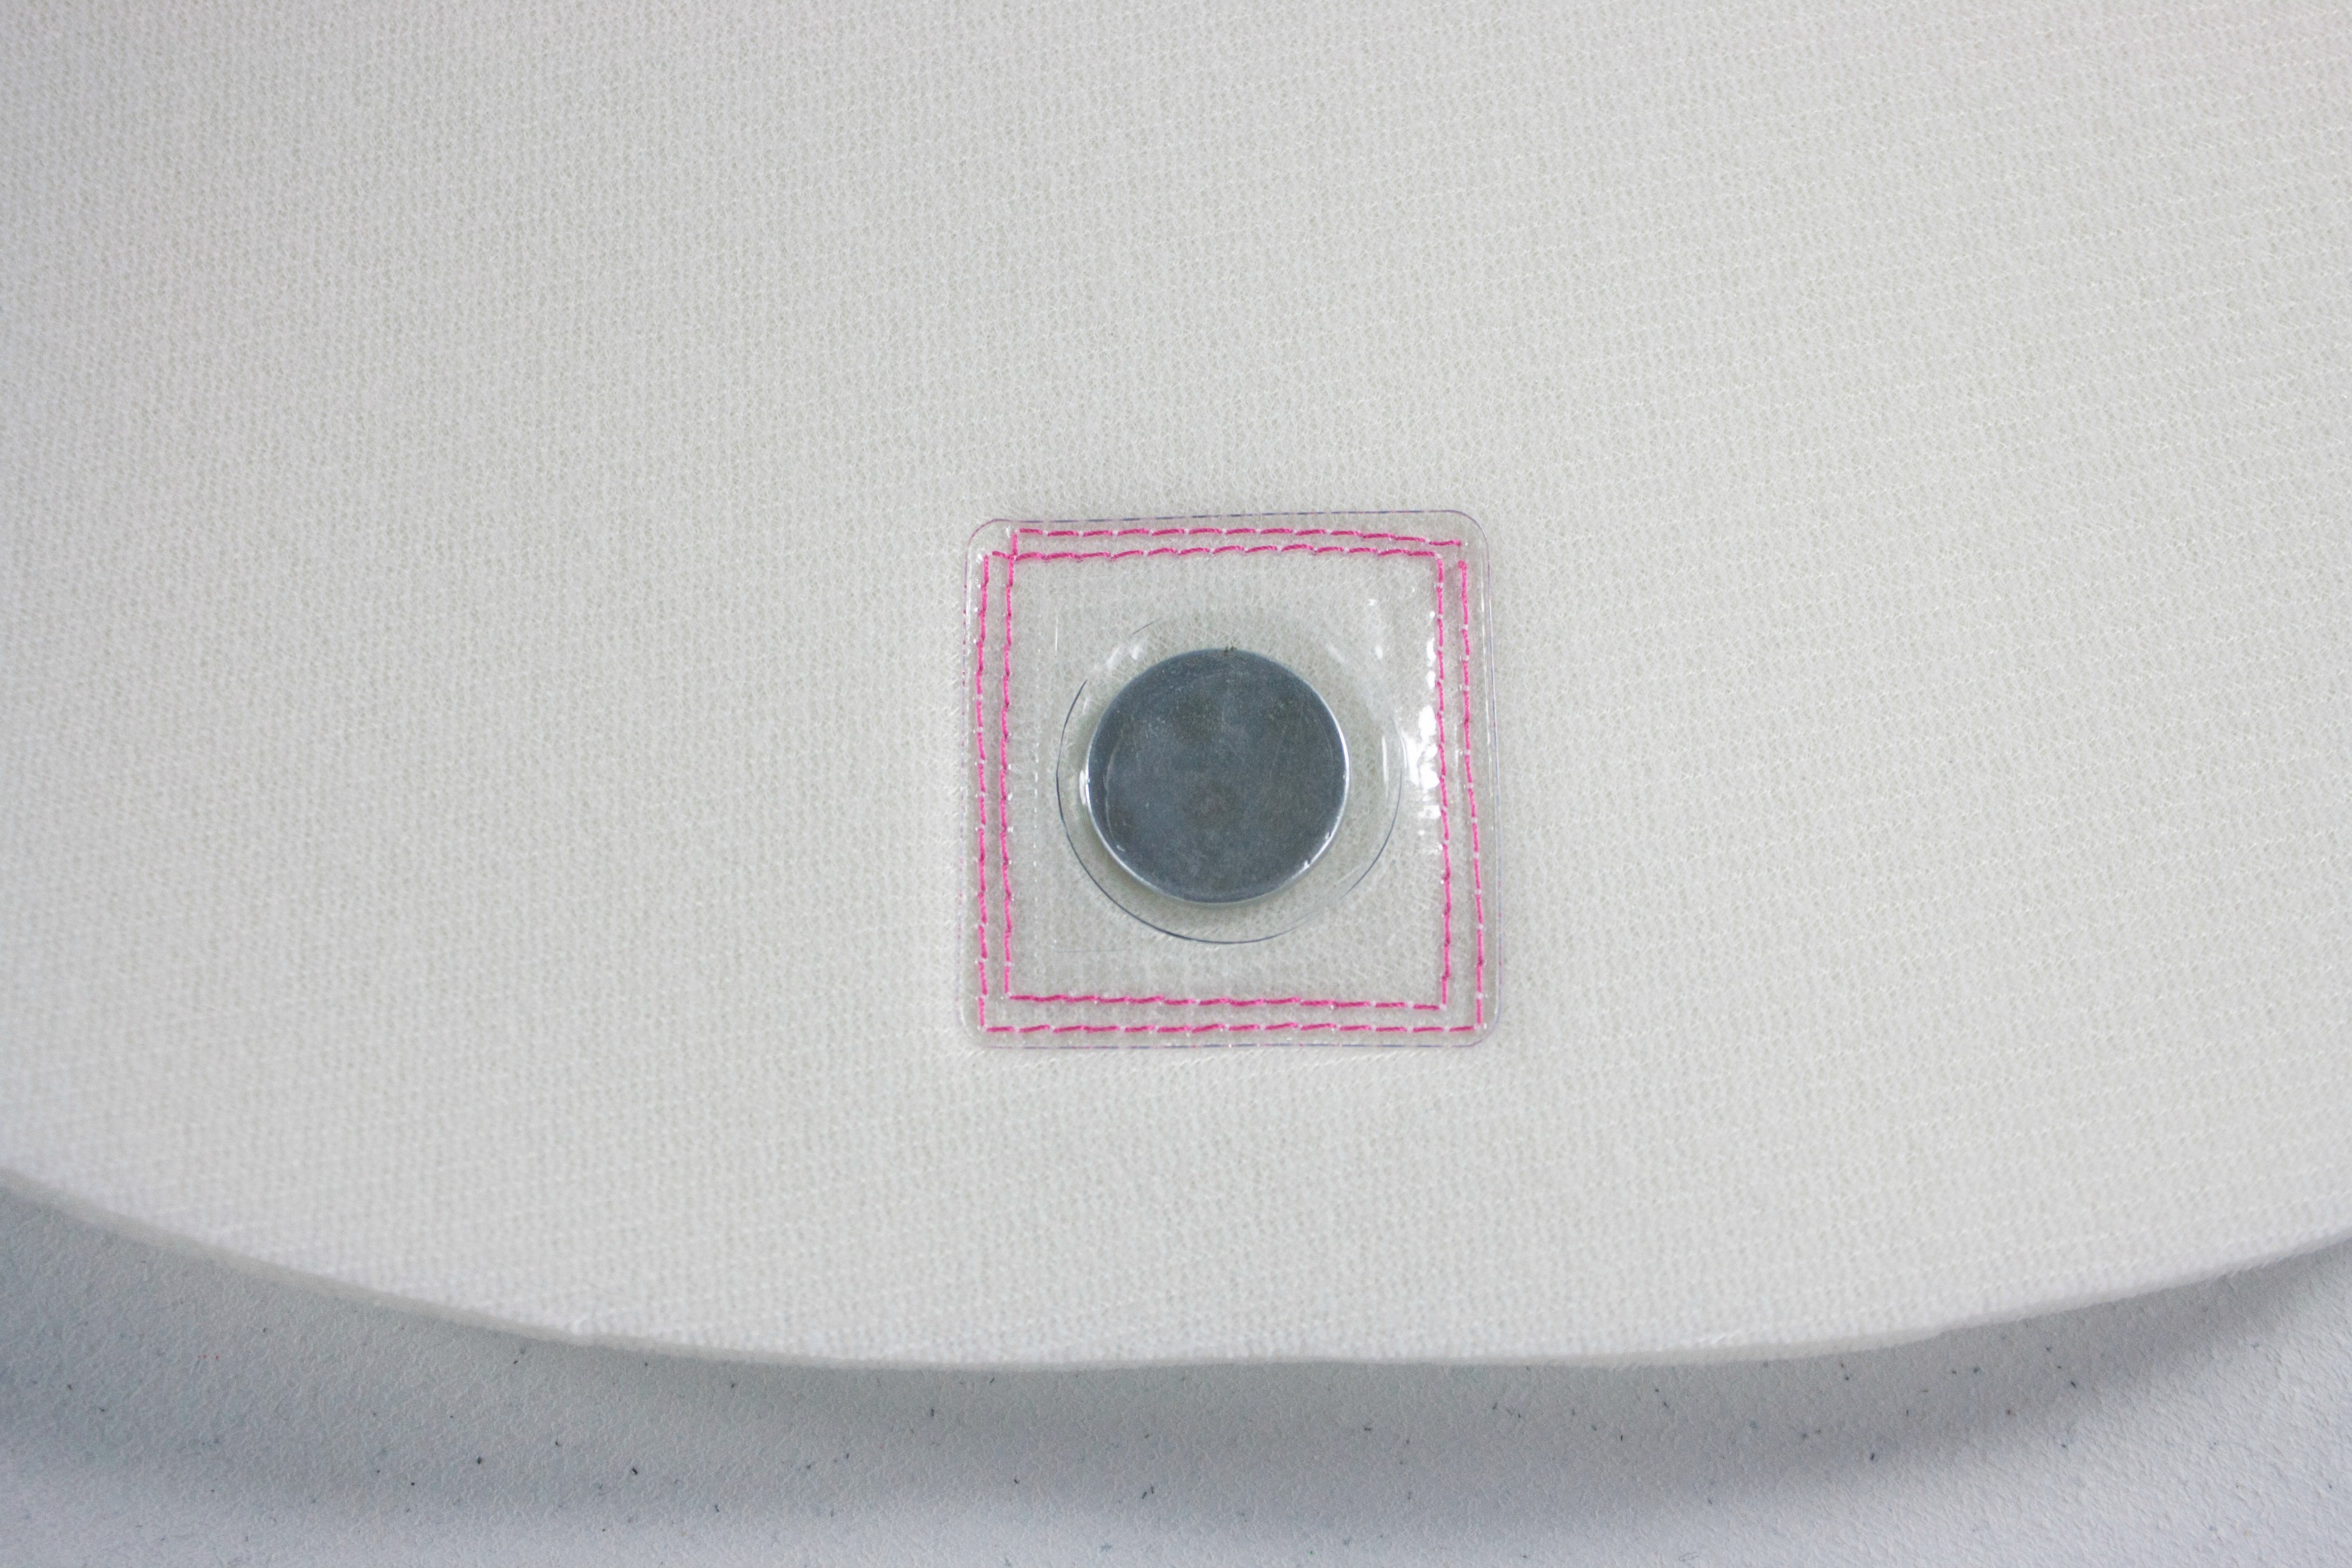 Stitching the invisible magnetic snap in place.